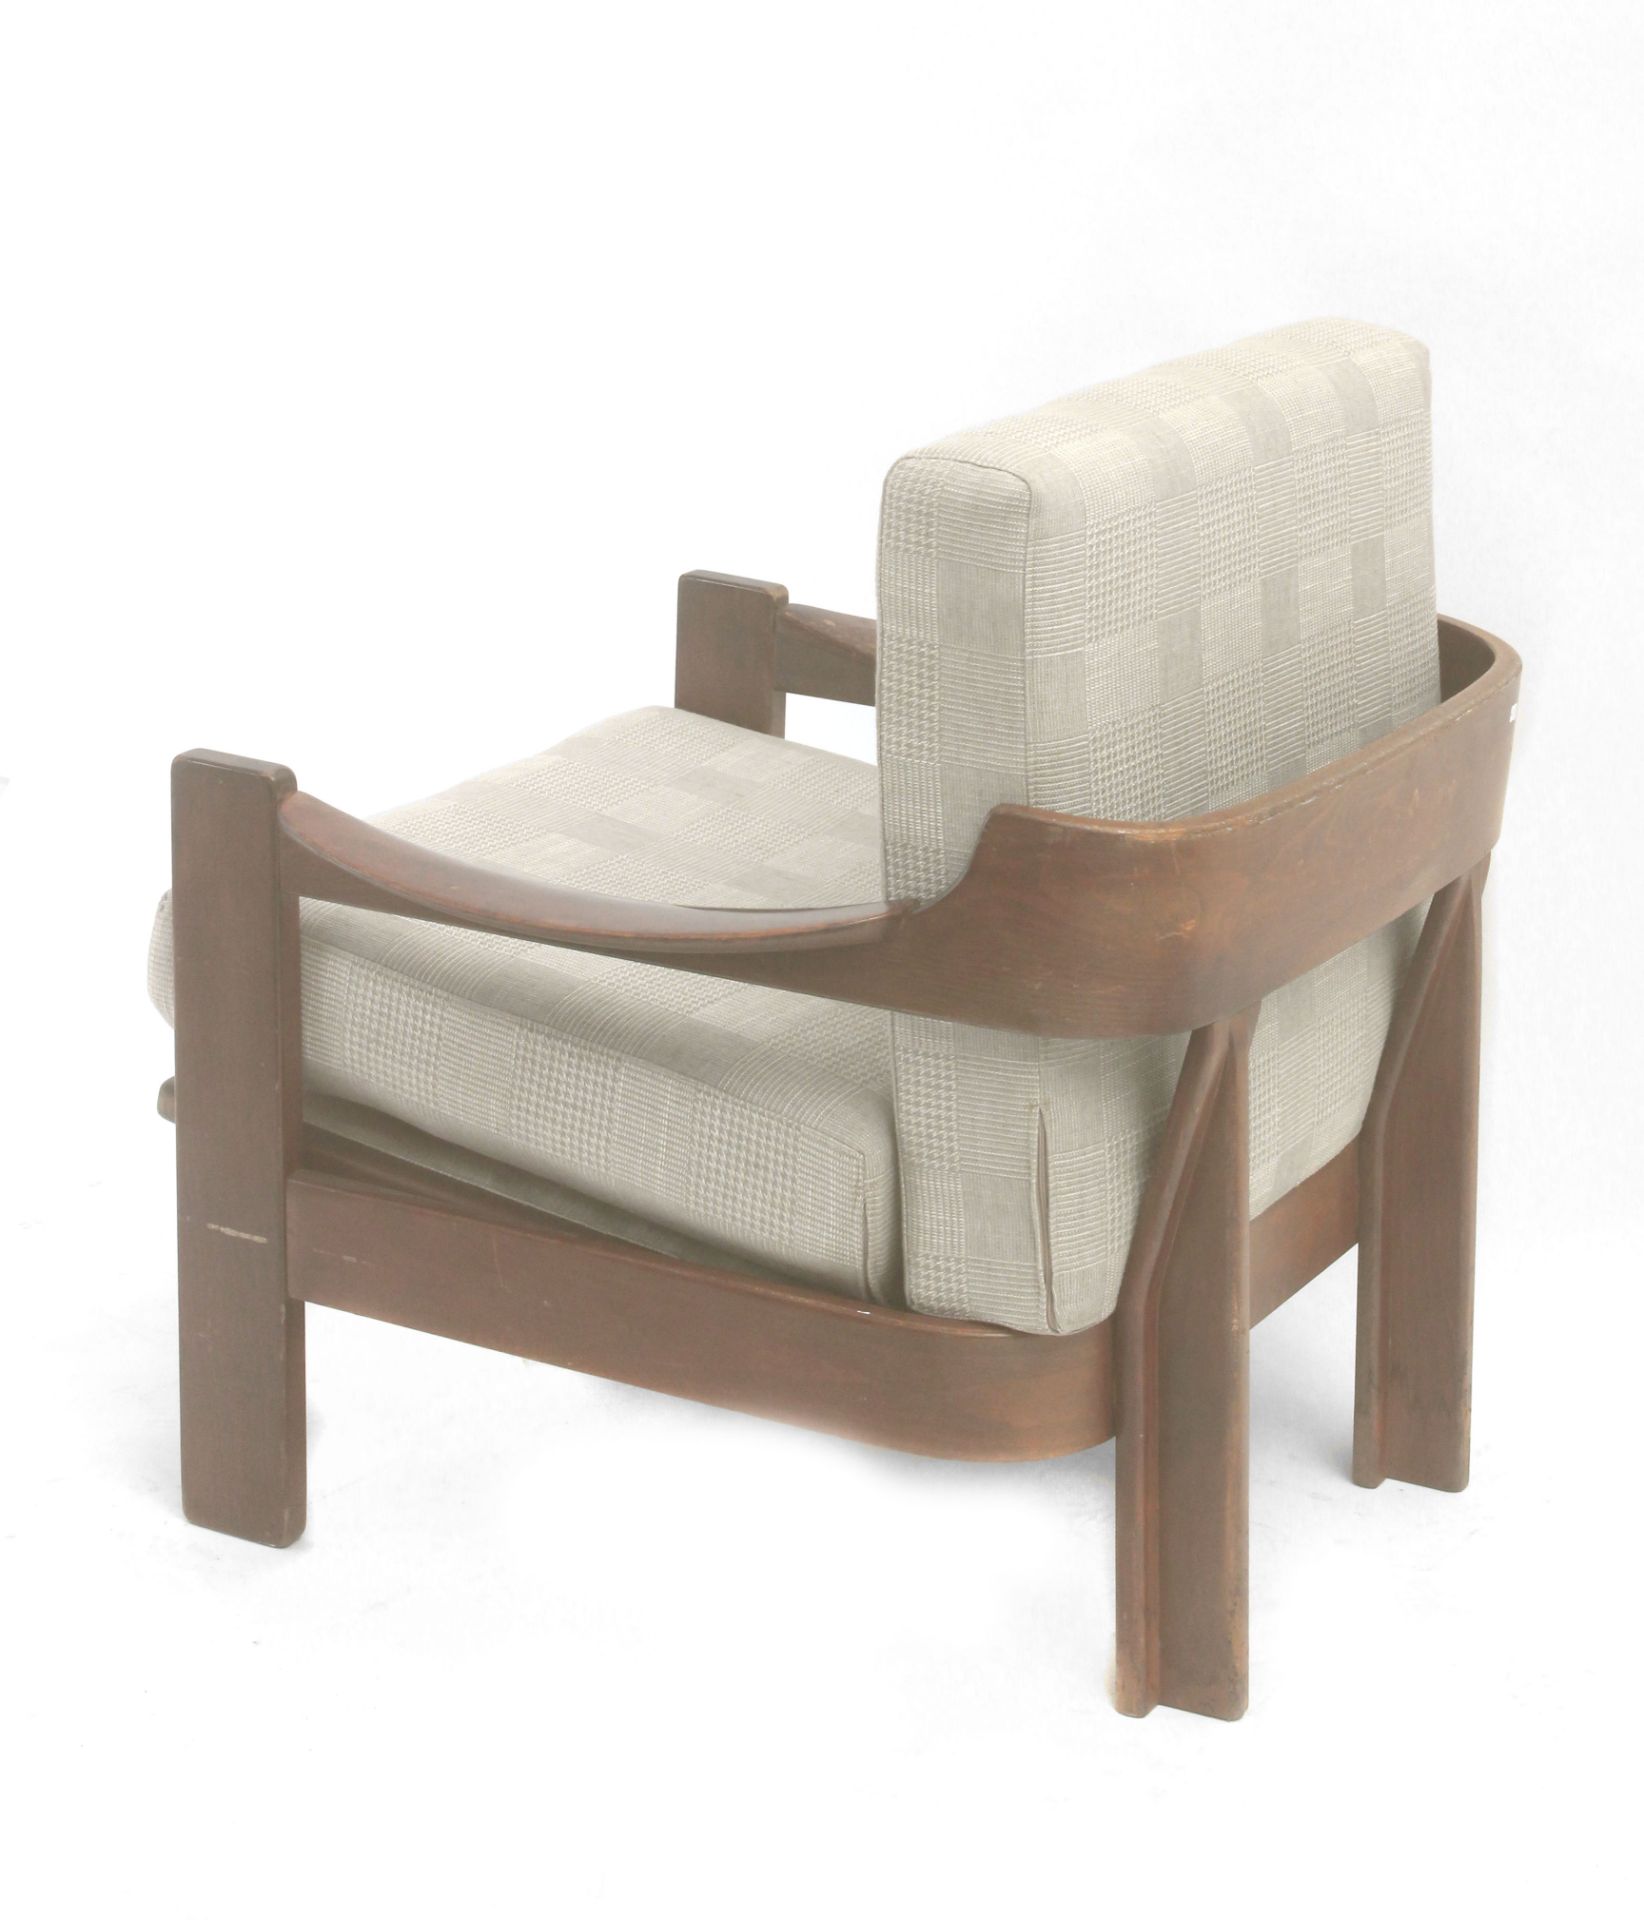 AG Barcelona. A pair of walnut armchairs circa 1970 - Image 5 of 10